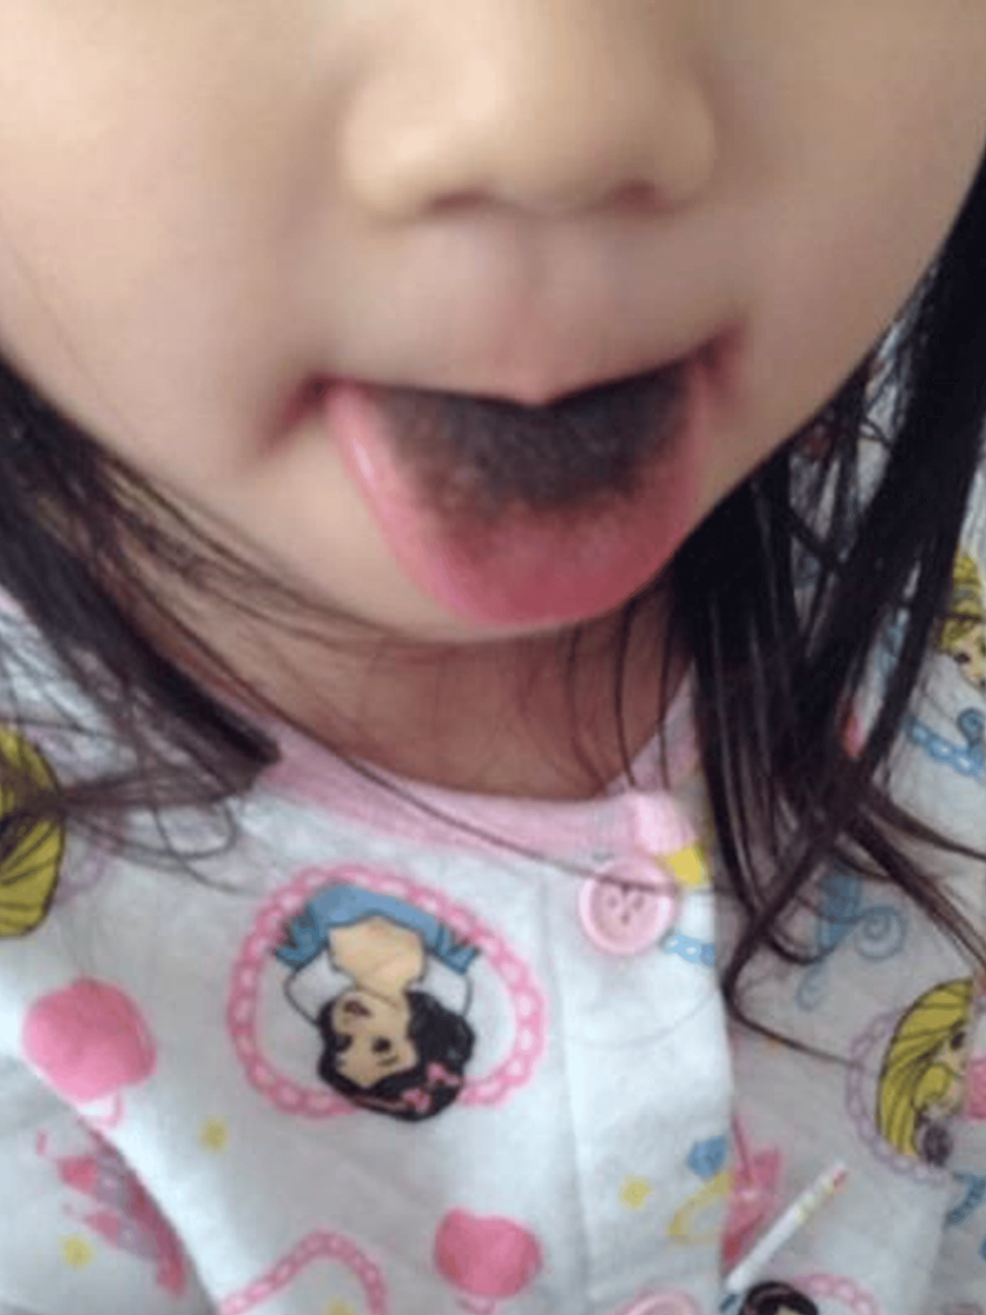 Black-hairy-tongue-during-linezolid-therapy-in-case-1.